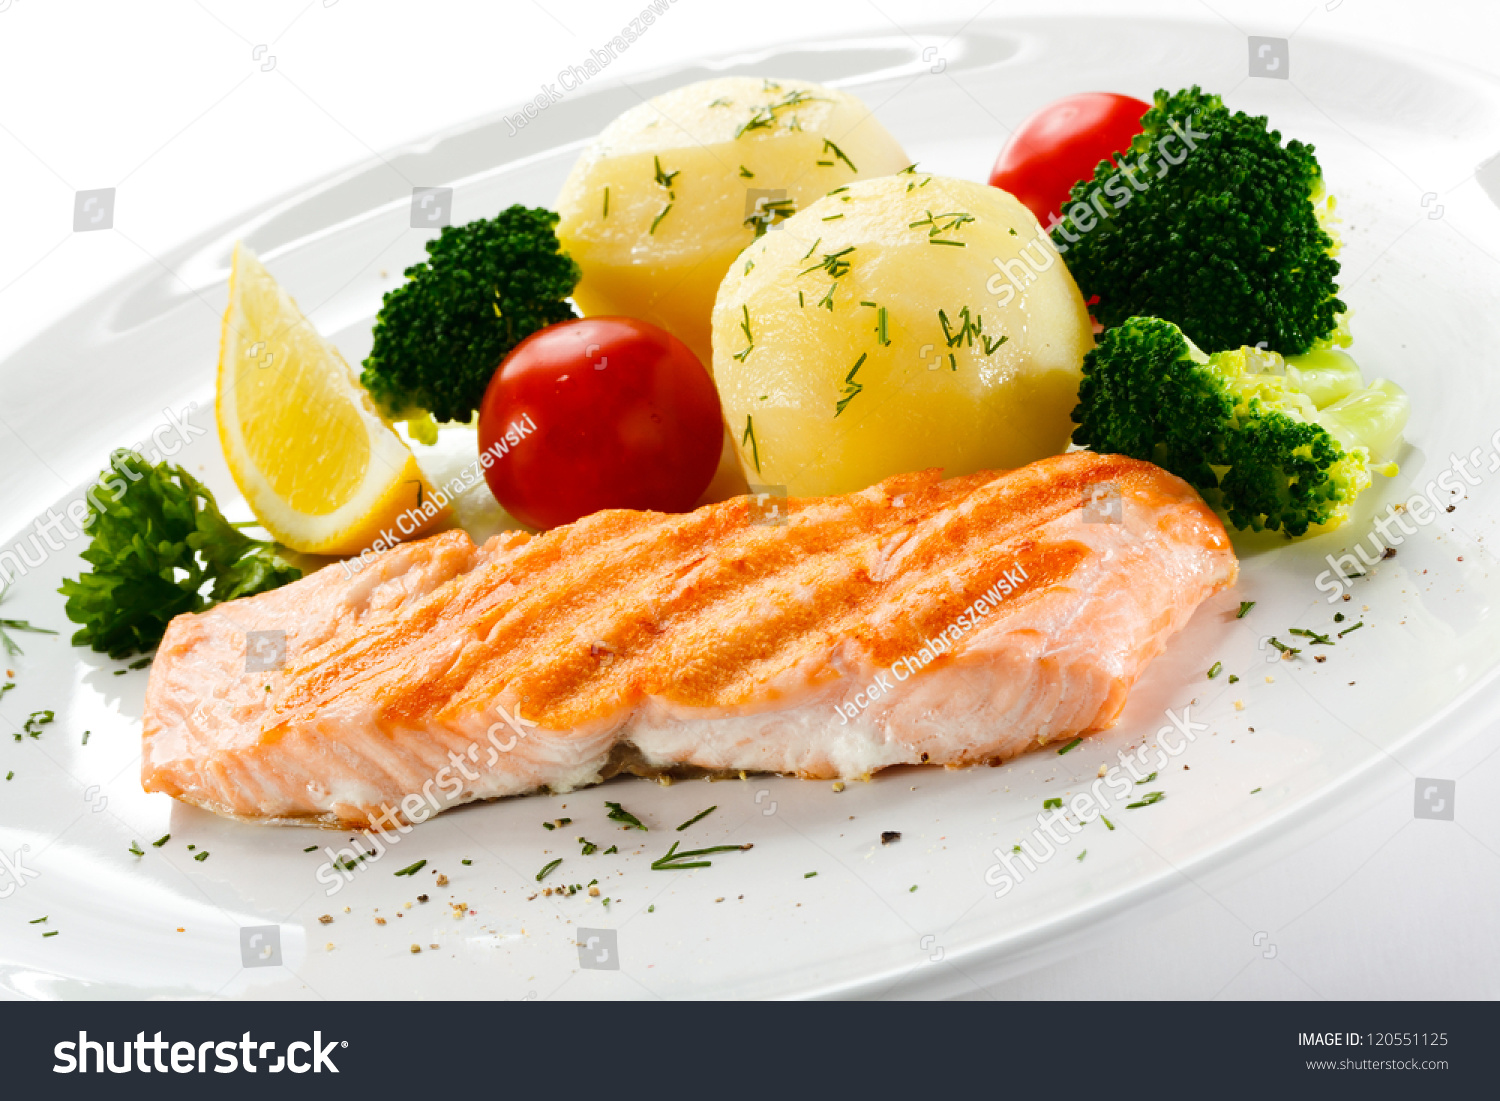 Grilled Salmon Boiled Potatoes Vegetables Stock Photo 120551125 ...